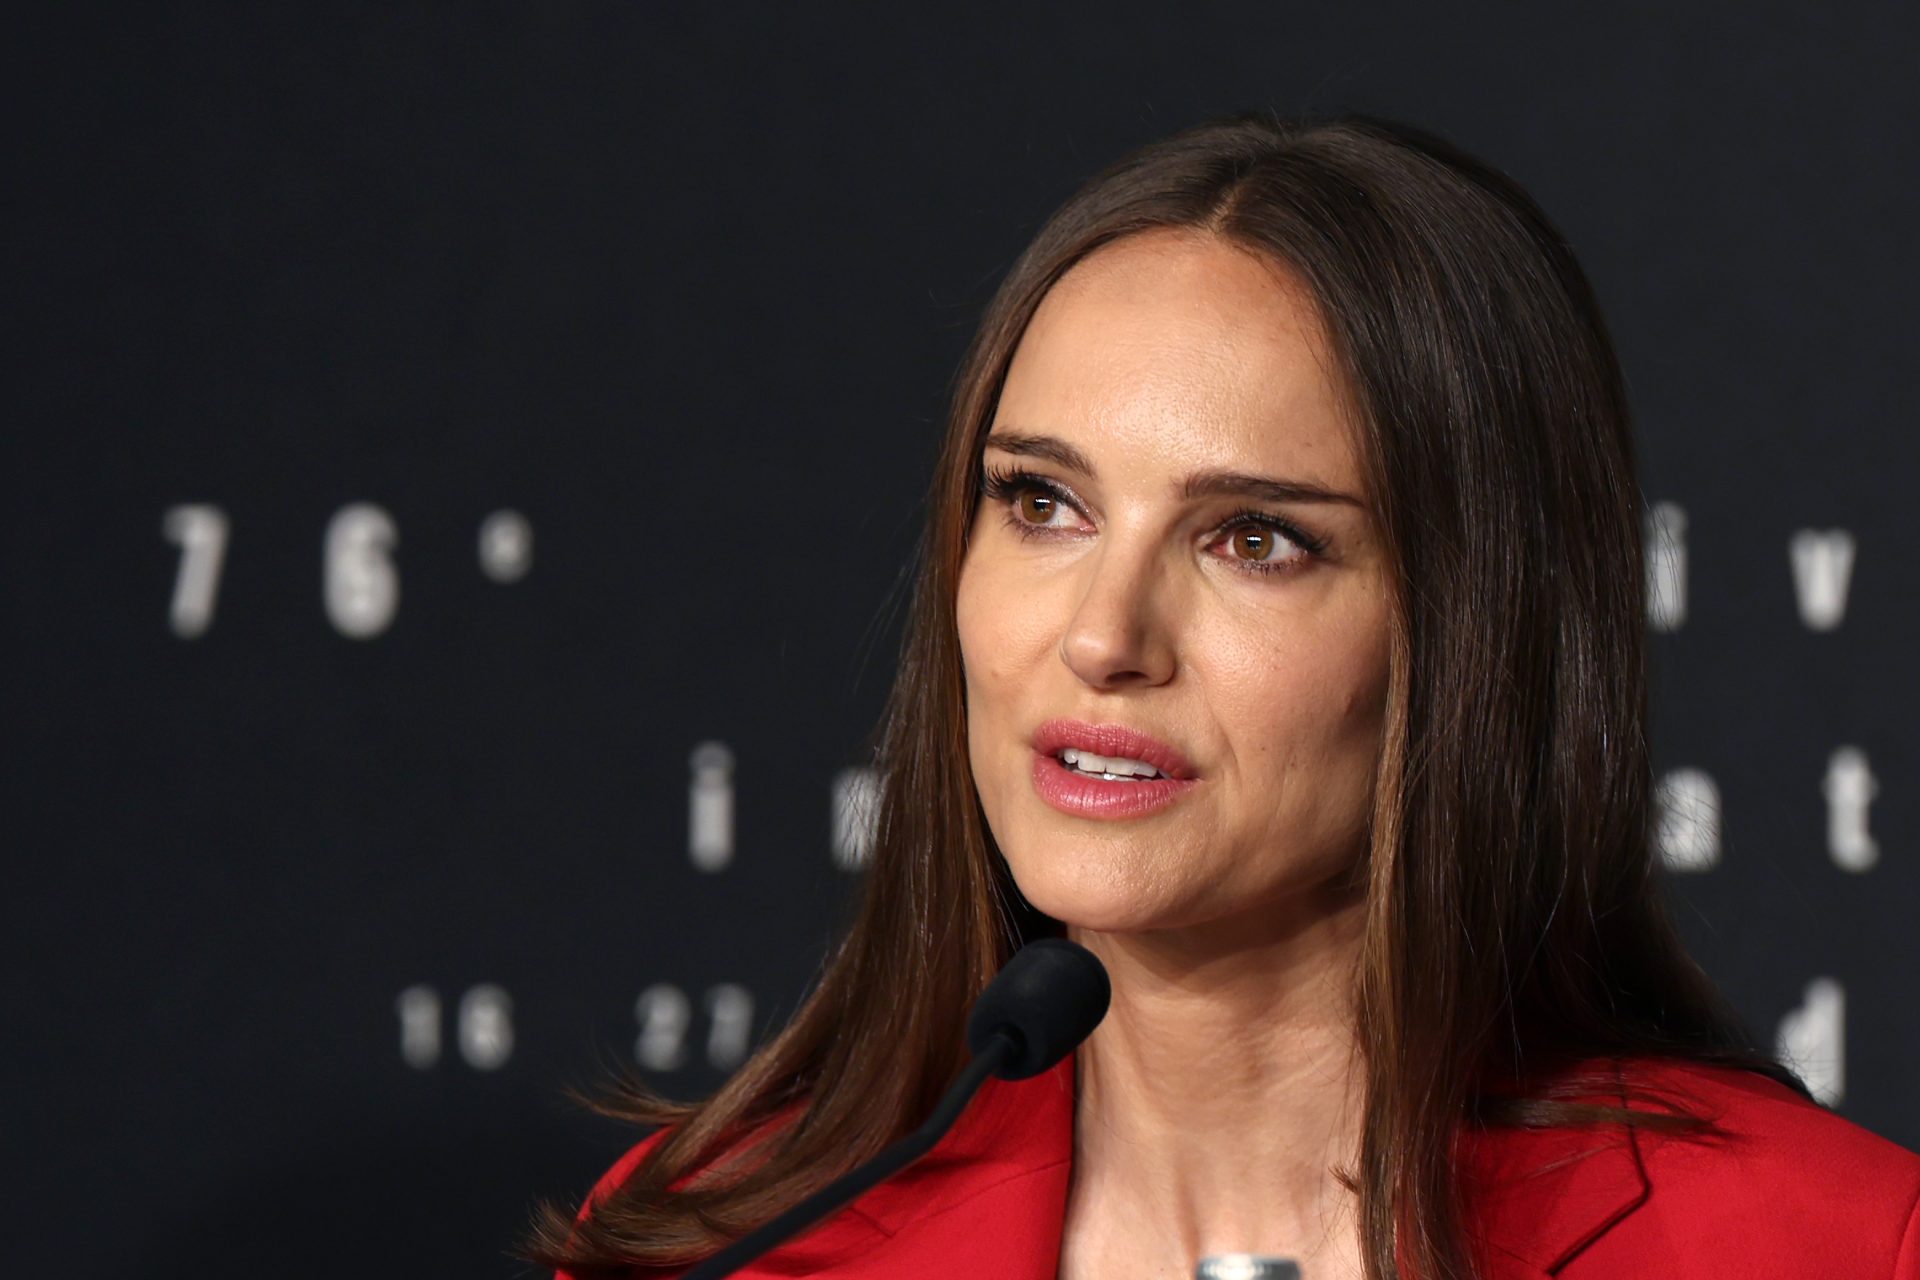 Kiss Gate: Natalie Portman supports the female soccer star who got an unwanted smacker